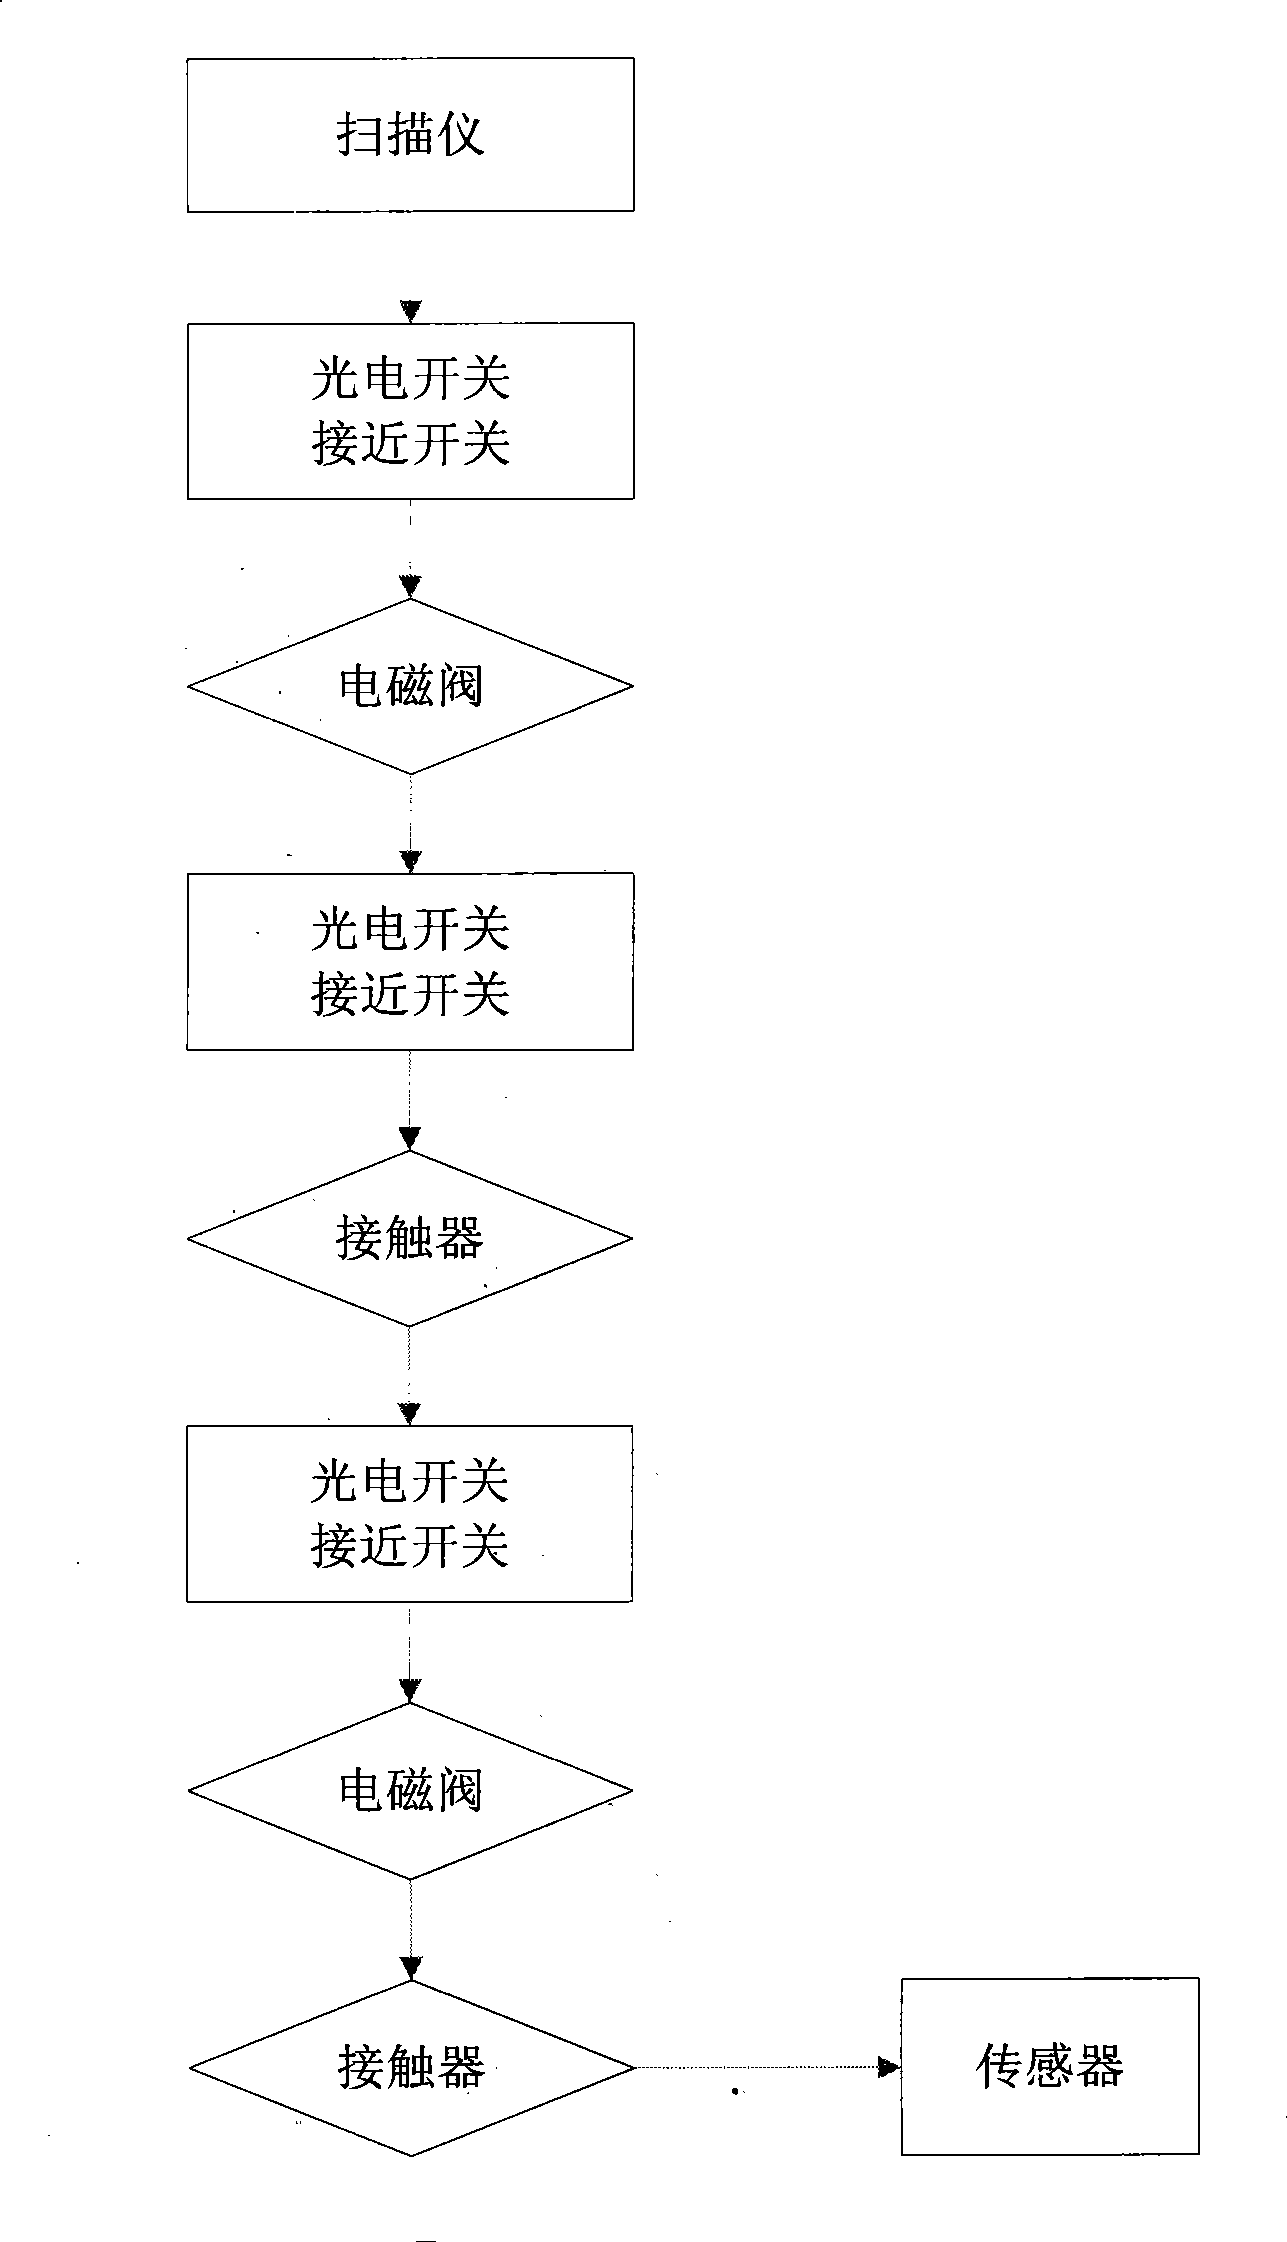 Brick-making dynamoelectric integrated blank-cutting method and active cut-in type blank-cutting machine